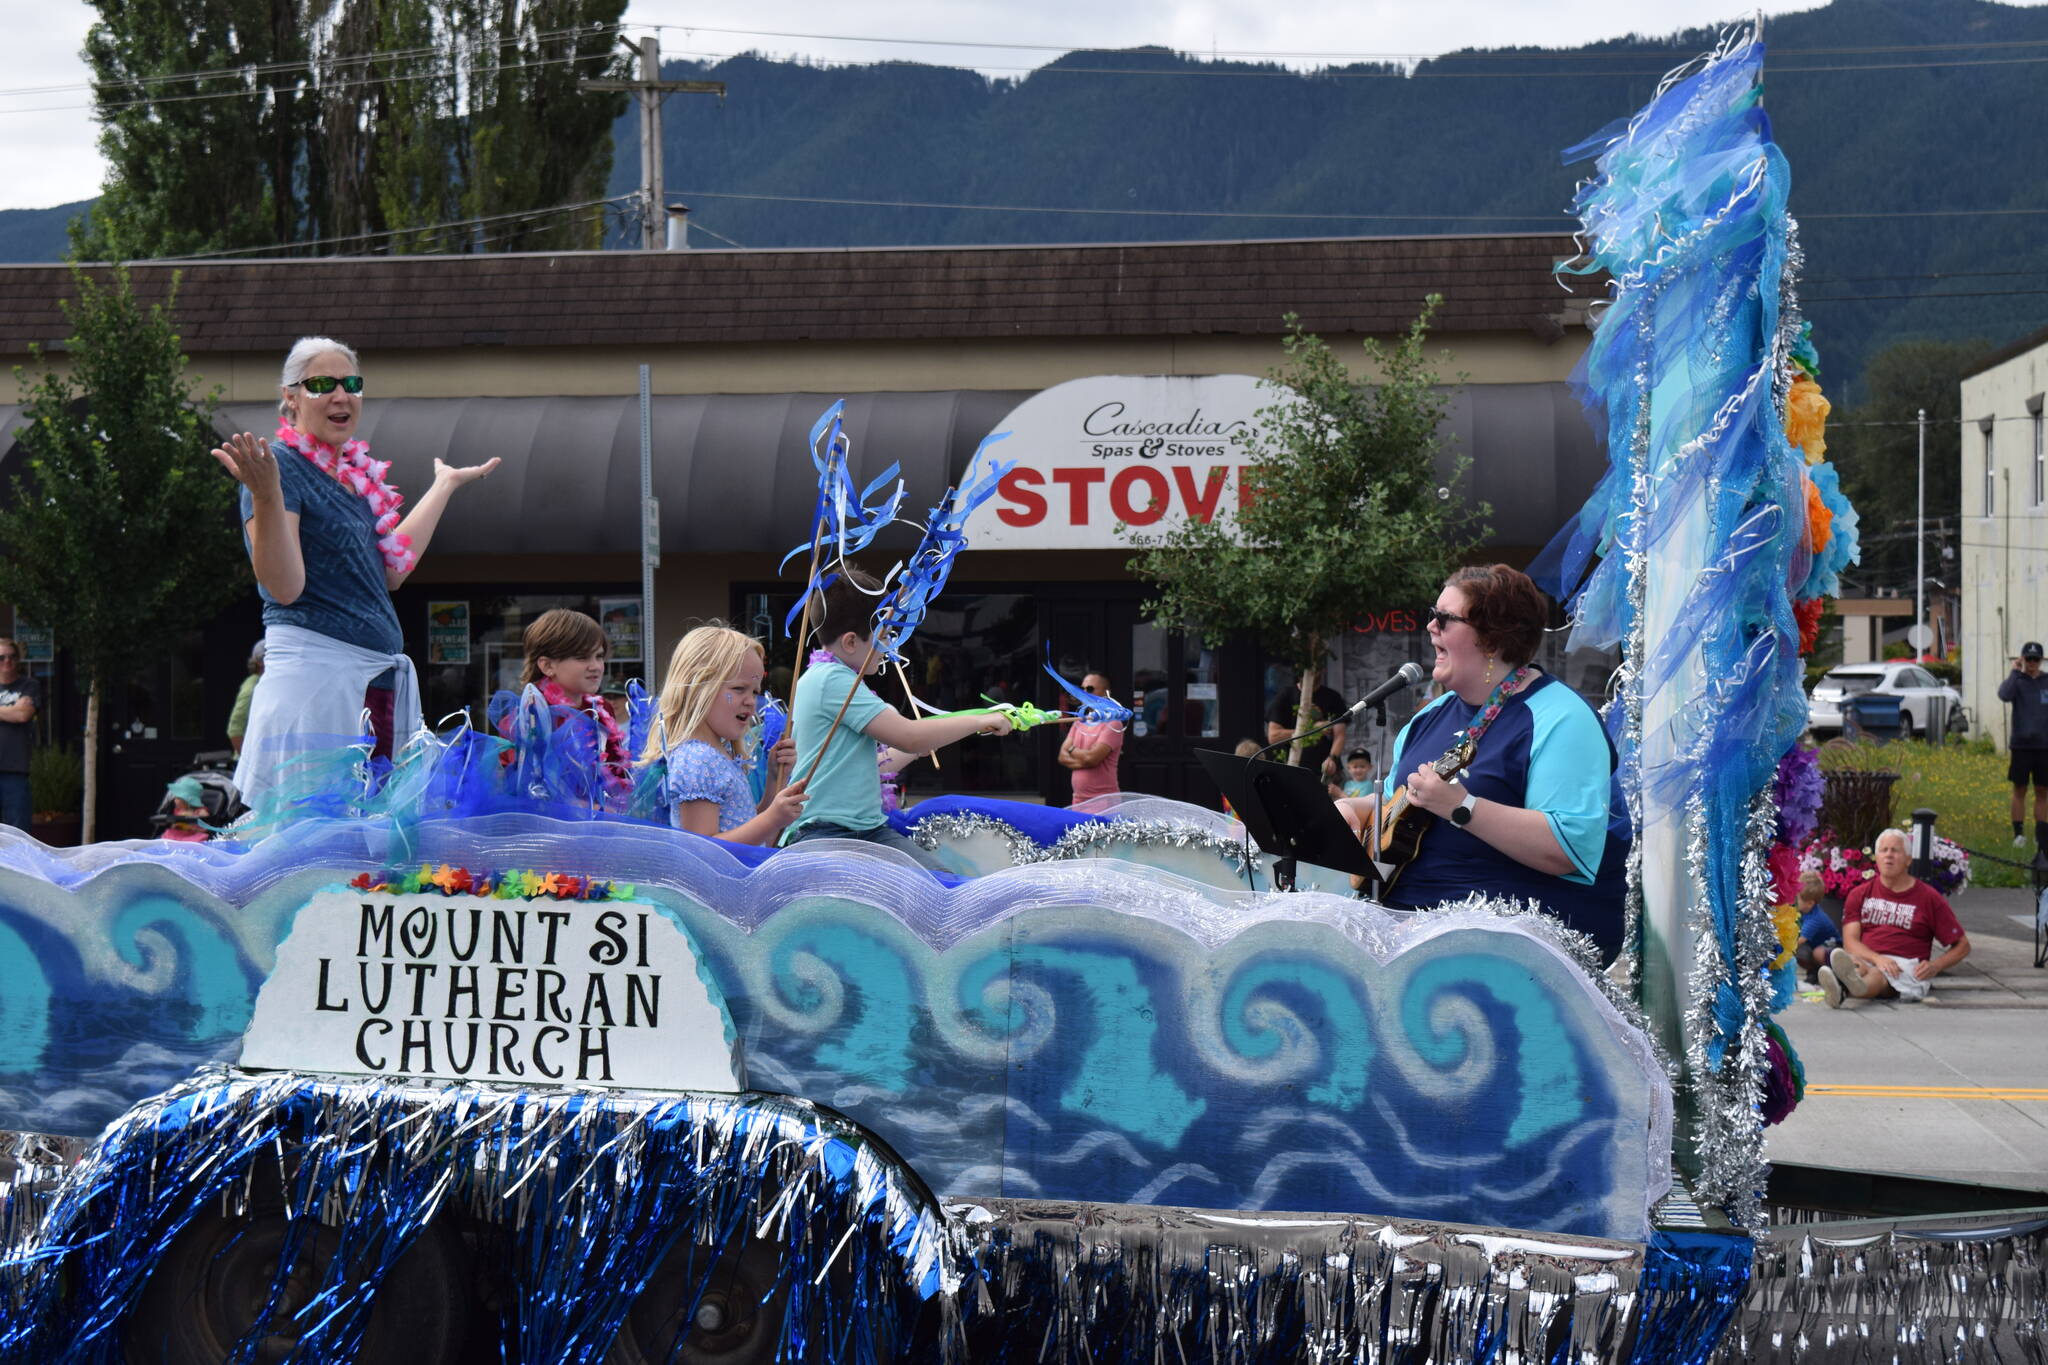 Members of Mount Si Lutheran Church perform during the Festival at Mt. Si Grand Parade. Photo Conor Wilson/Valley Record.